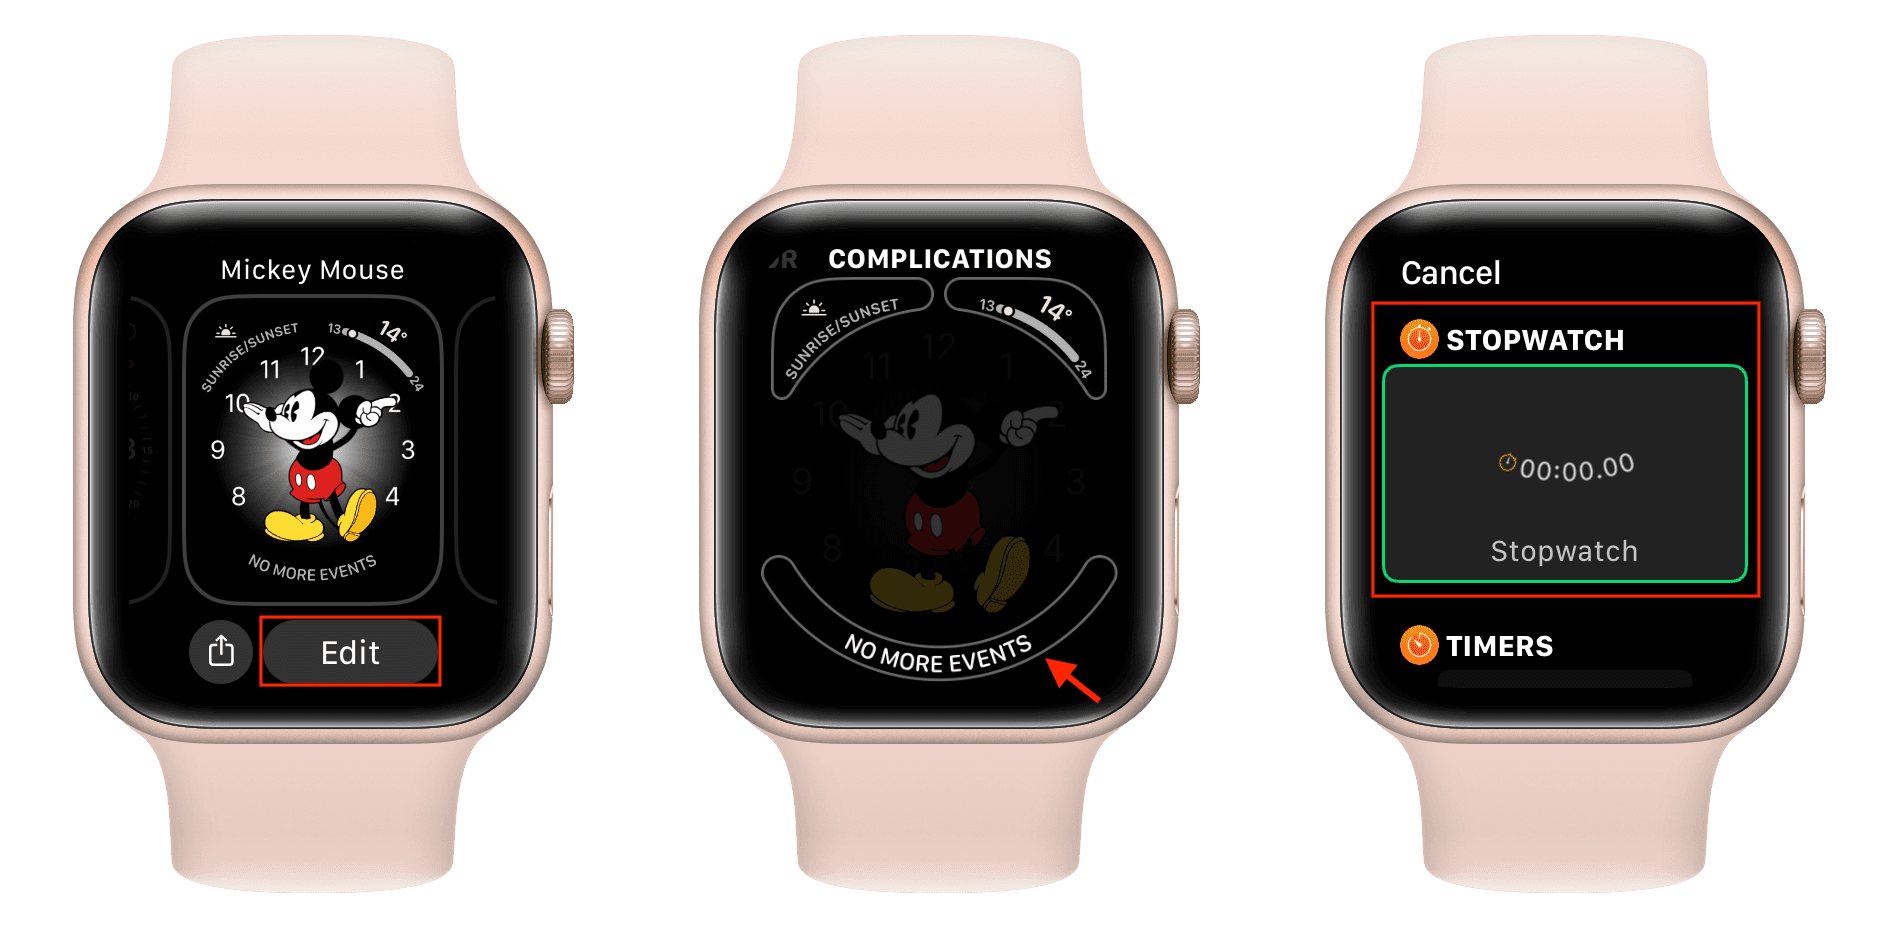 Adding Stopwatch complication to Mickey Mouse watch face